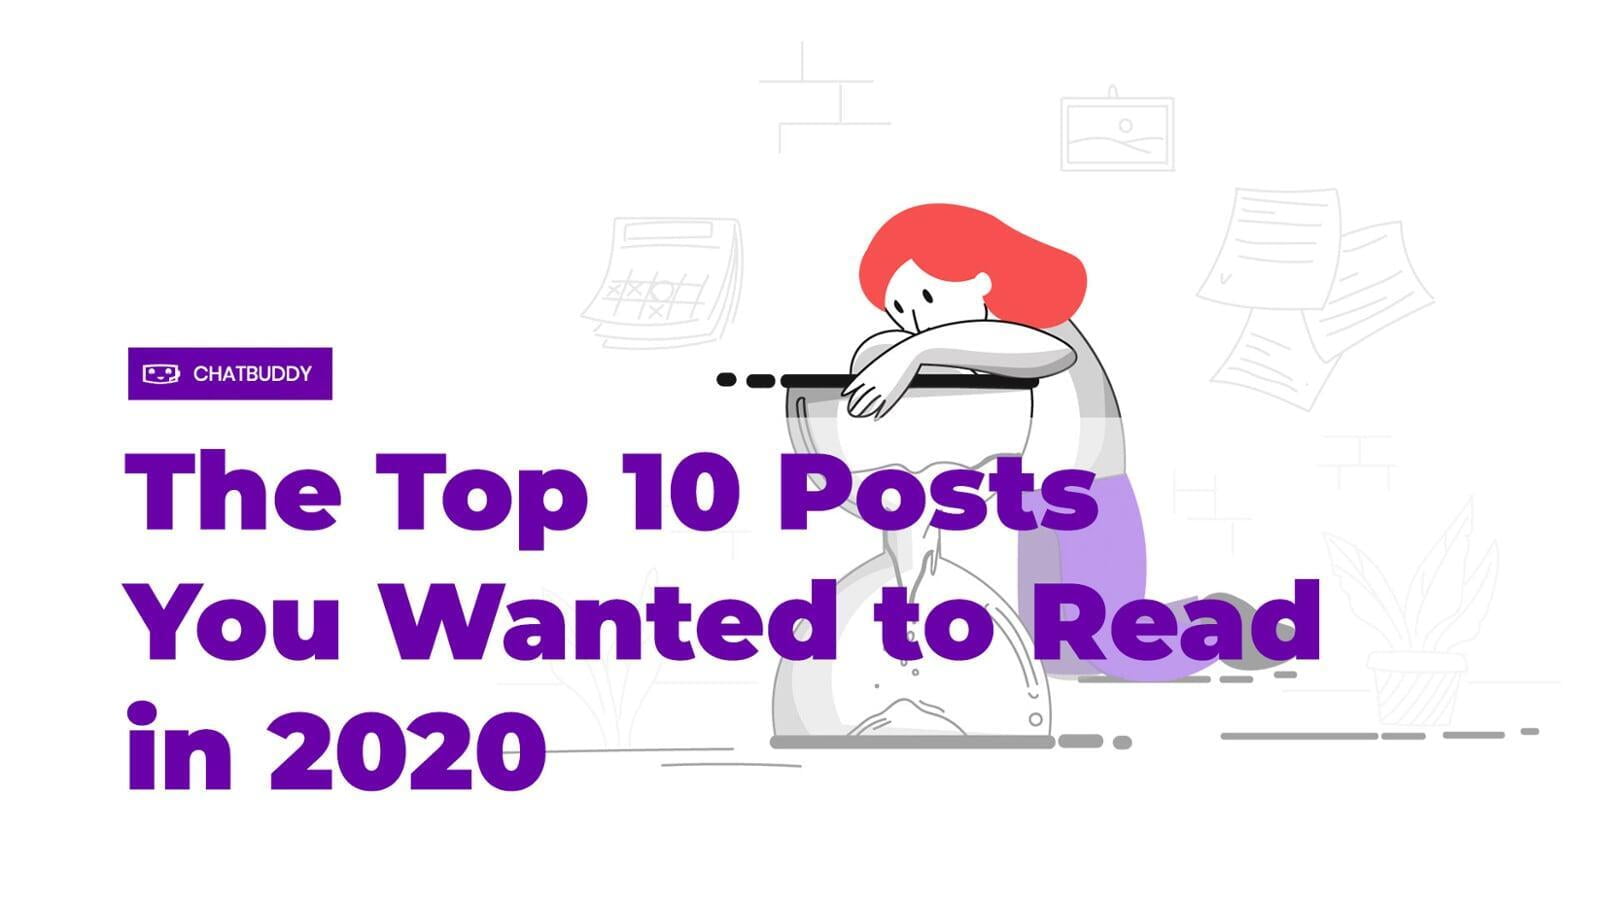 The Top 10 Posts You Wanted to Read in 2020